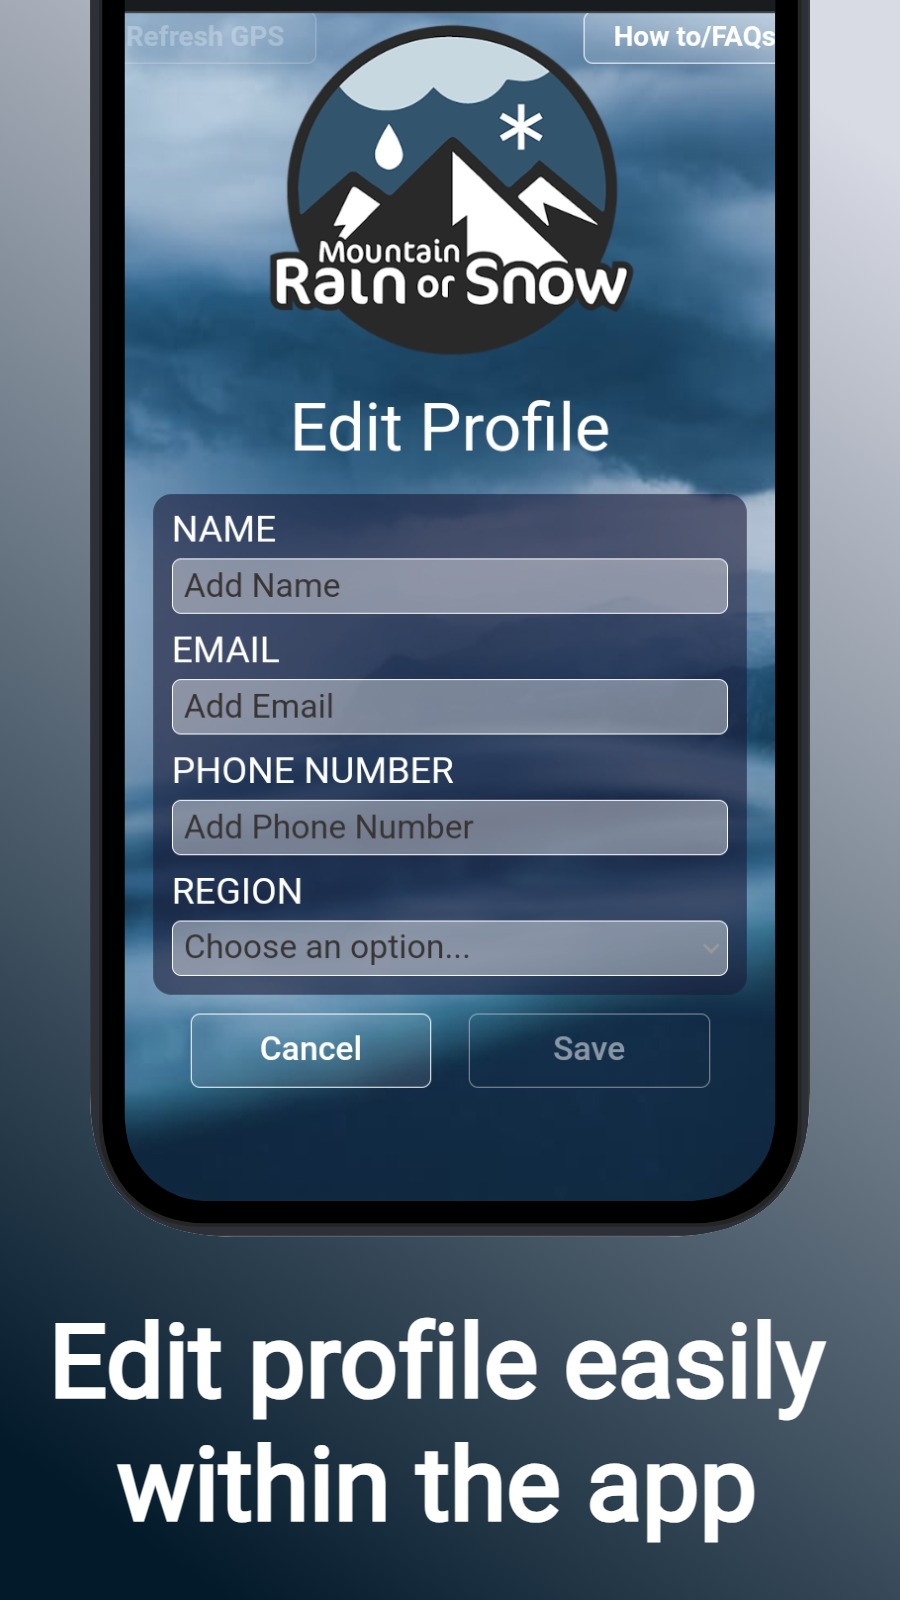 Edit profile easily within the app